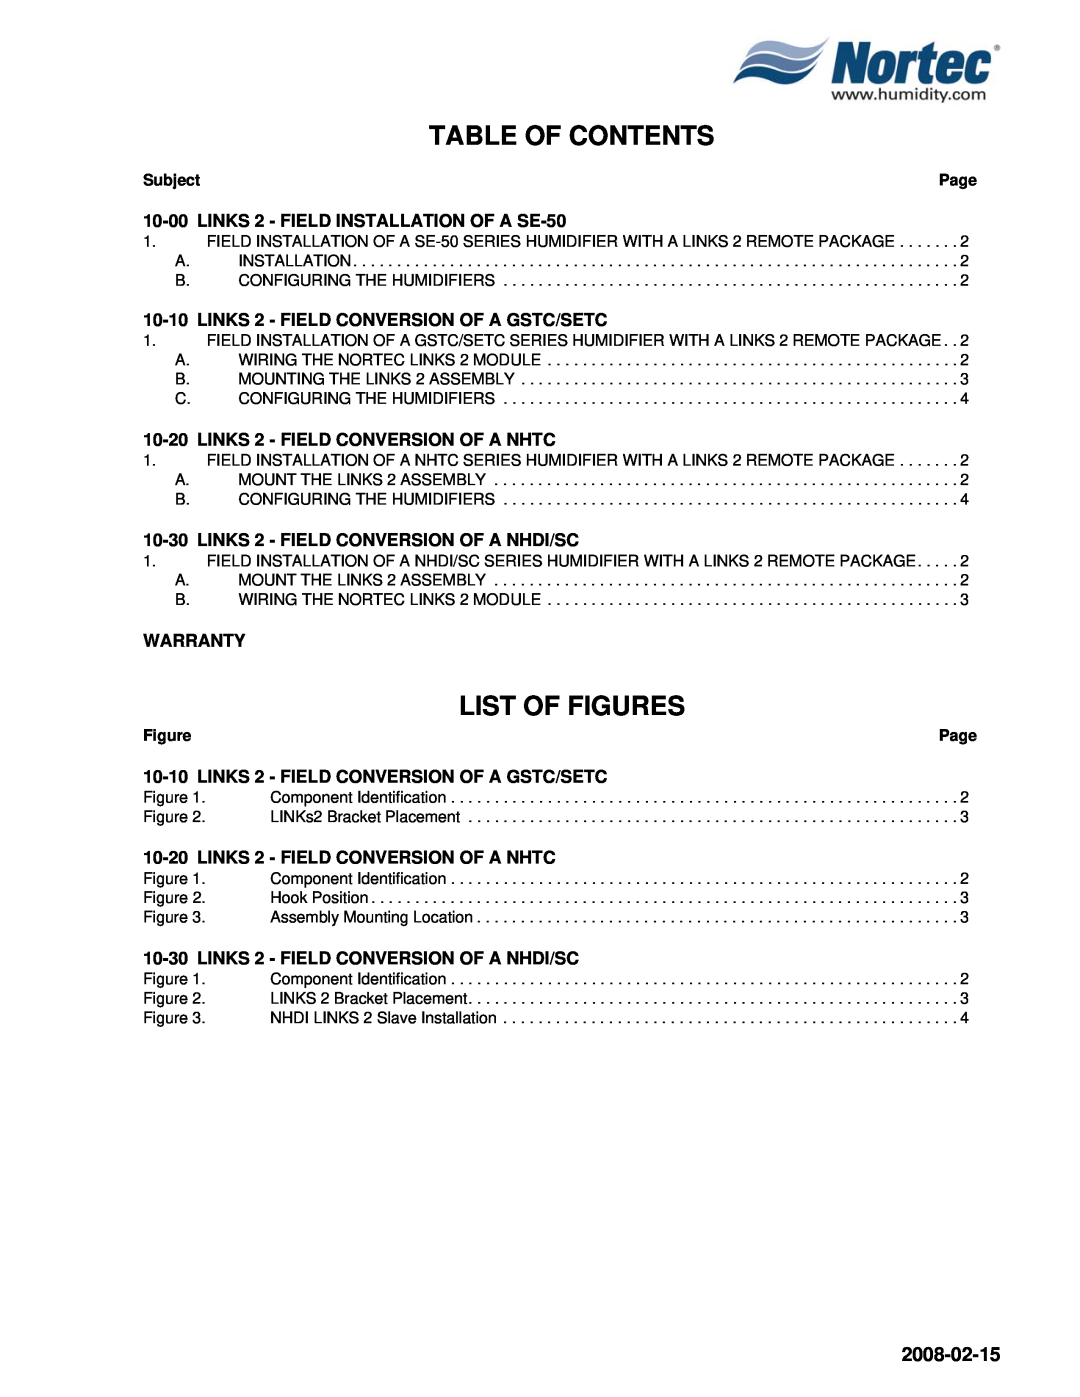 Nortec Industries SETC, NHSC Table Of Contents, List Of Figures, 2008-02-15, 10-00LINKS 2 - FIELD INSTALLATION OF A SE-50 